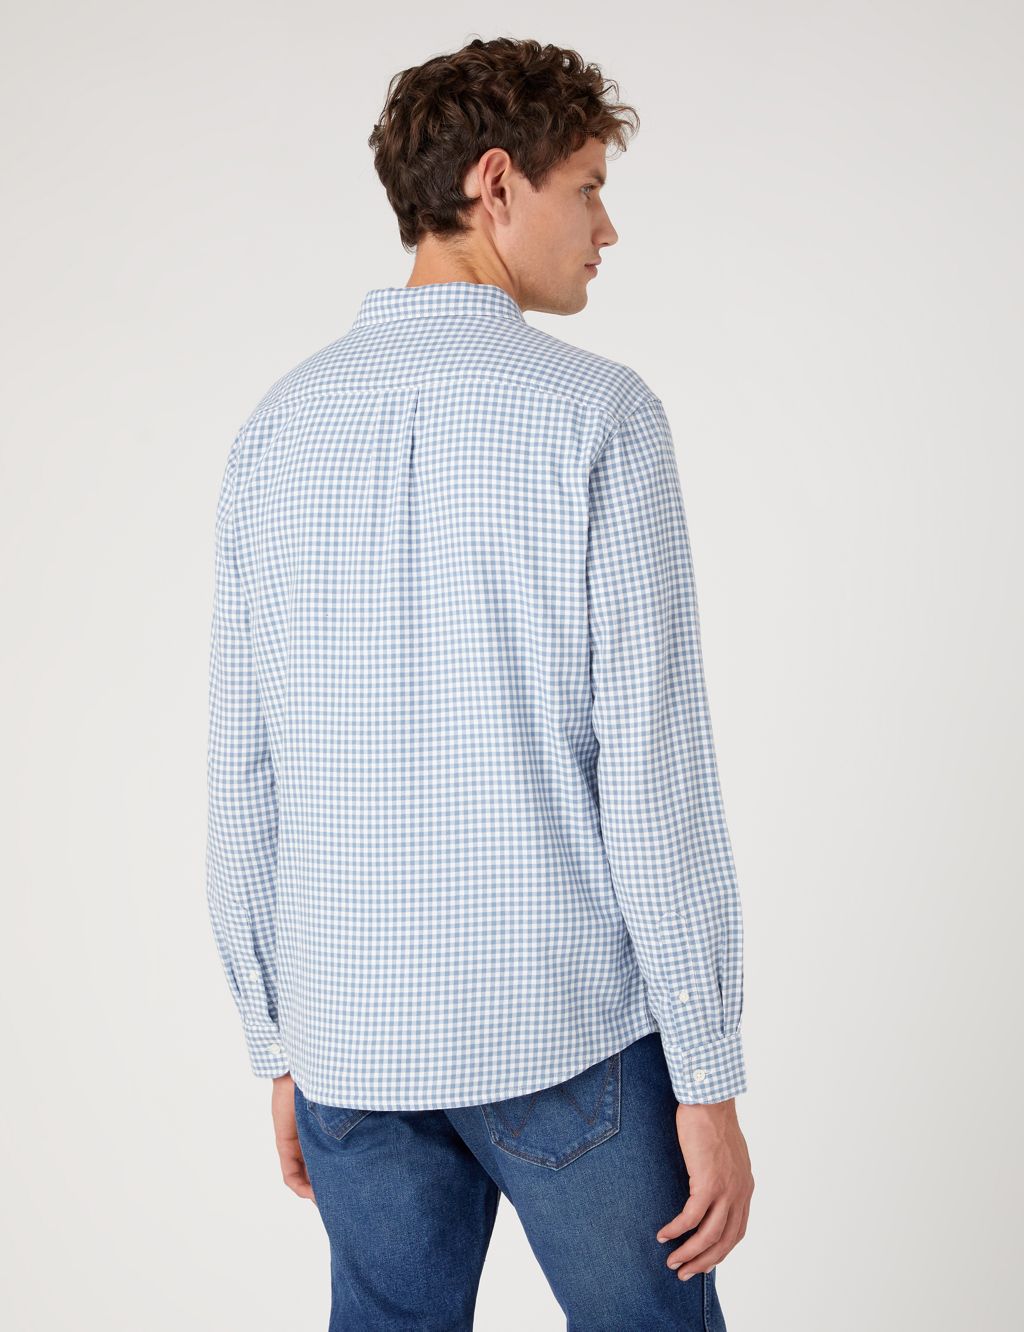 Pure Cotton Gingham Check Oxford Shirt image 2